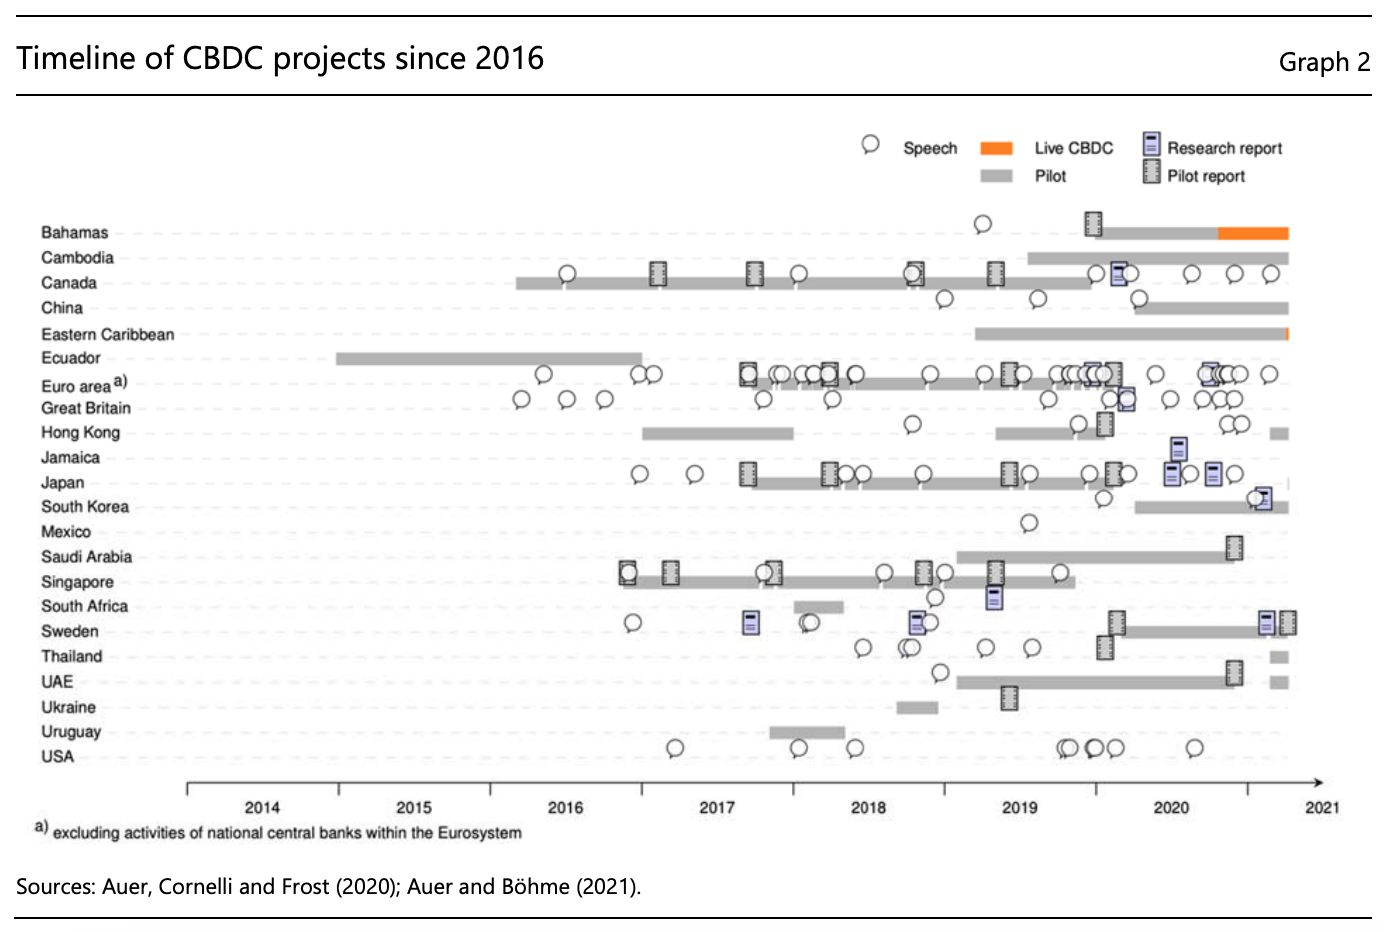 Timeline of CBDC projects since 2016, Source: BIS, 2021